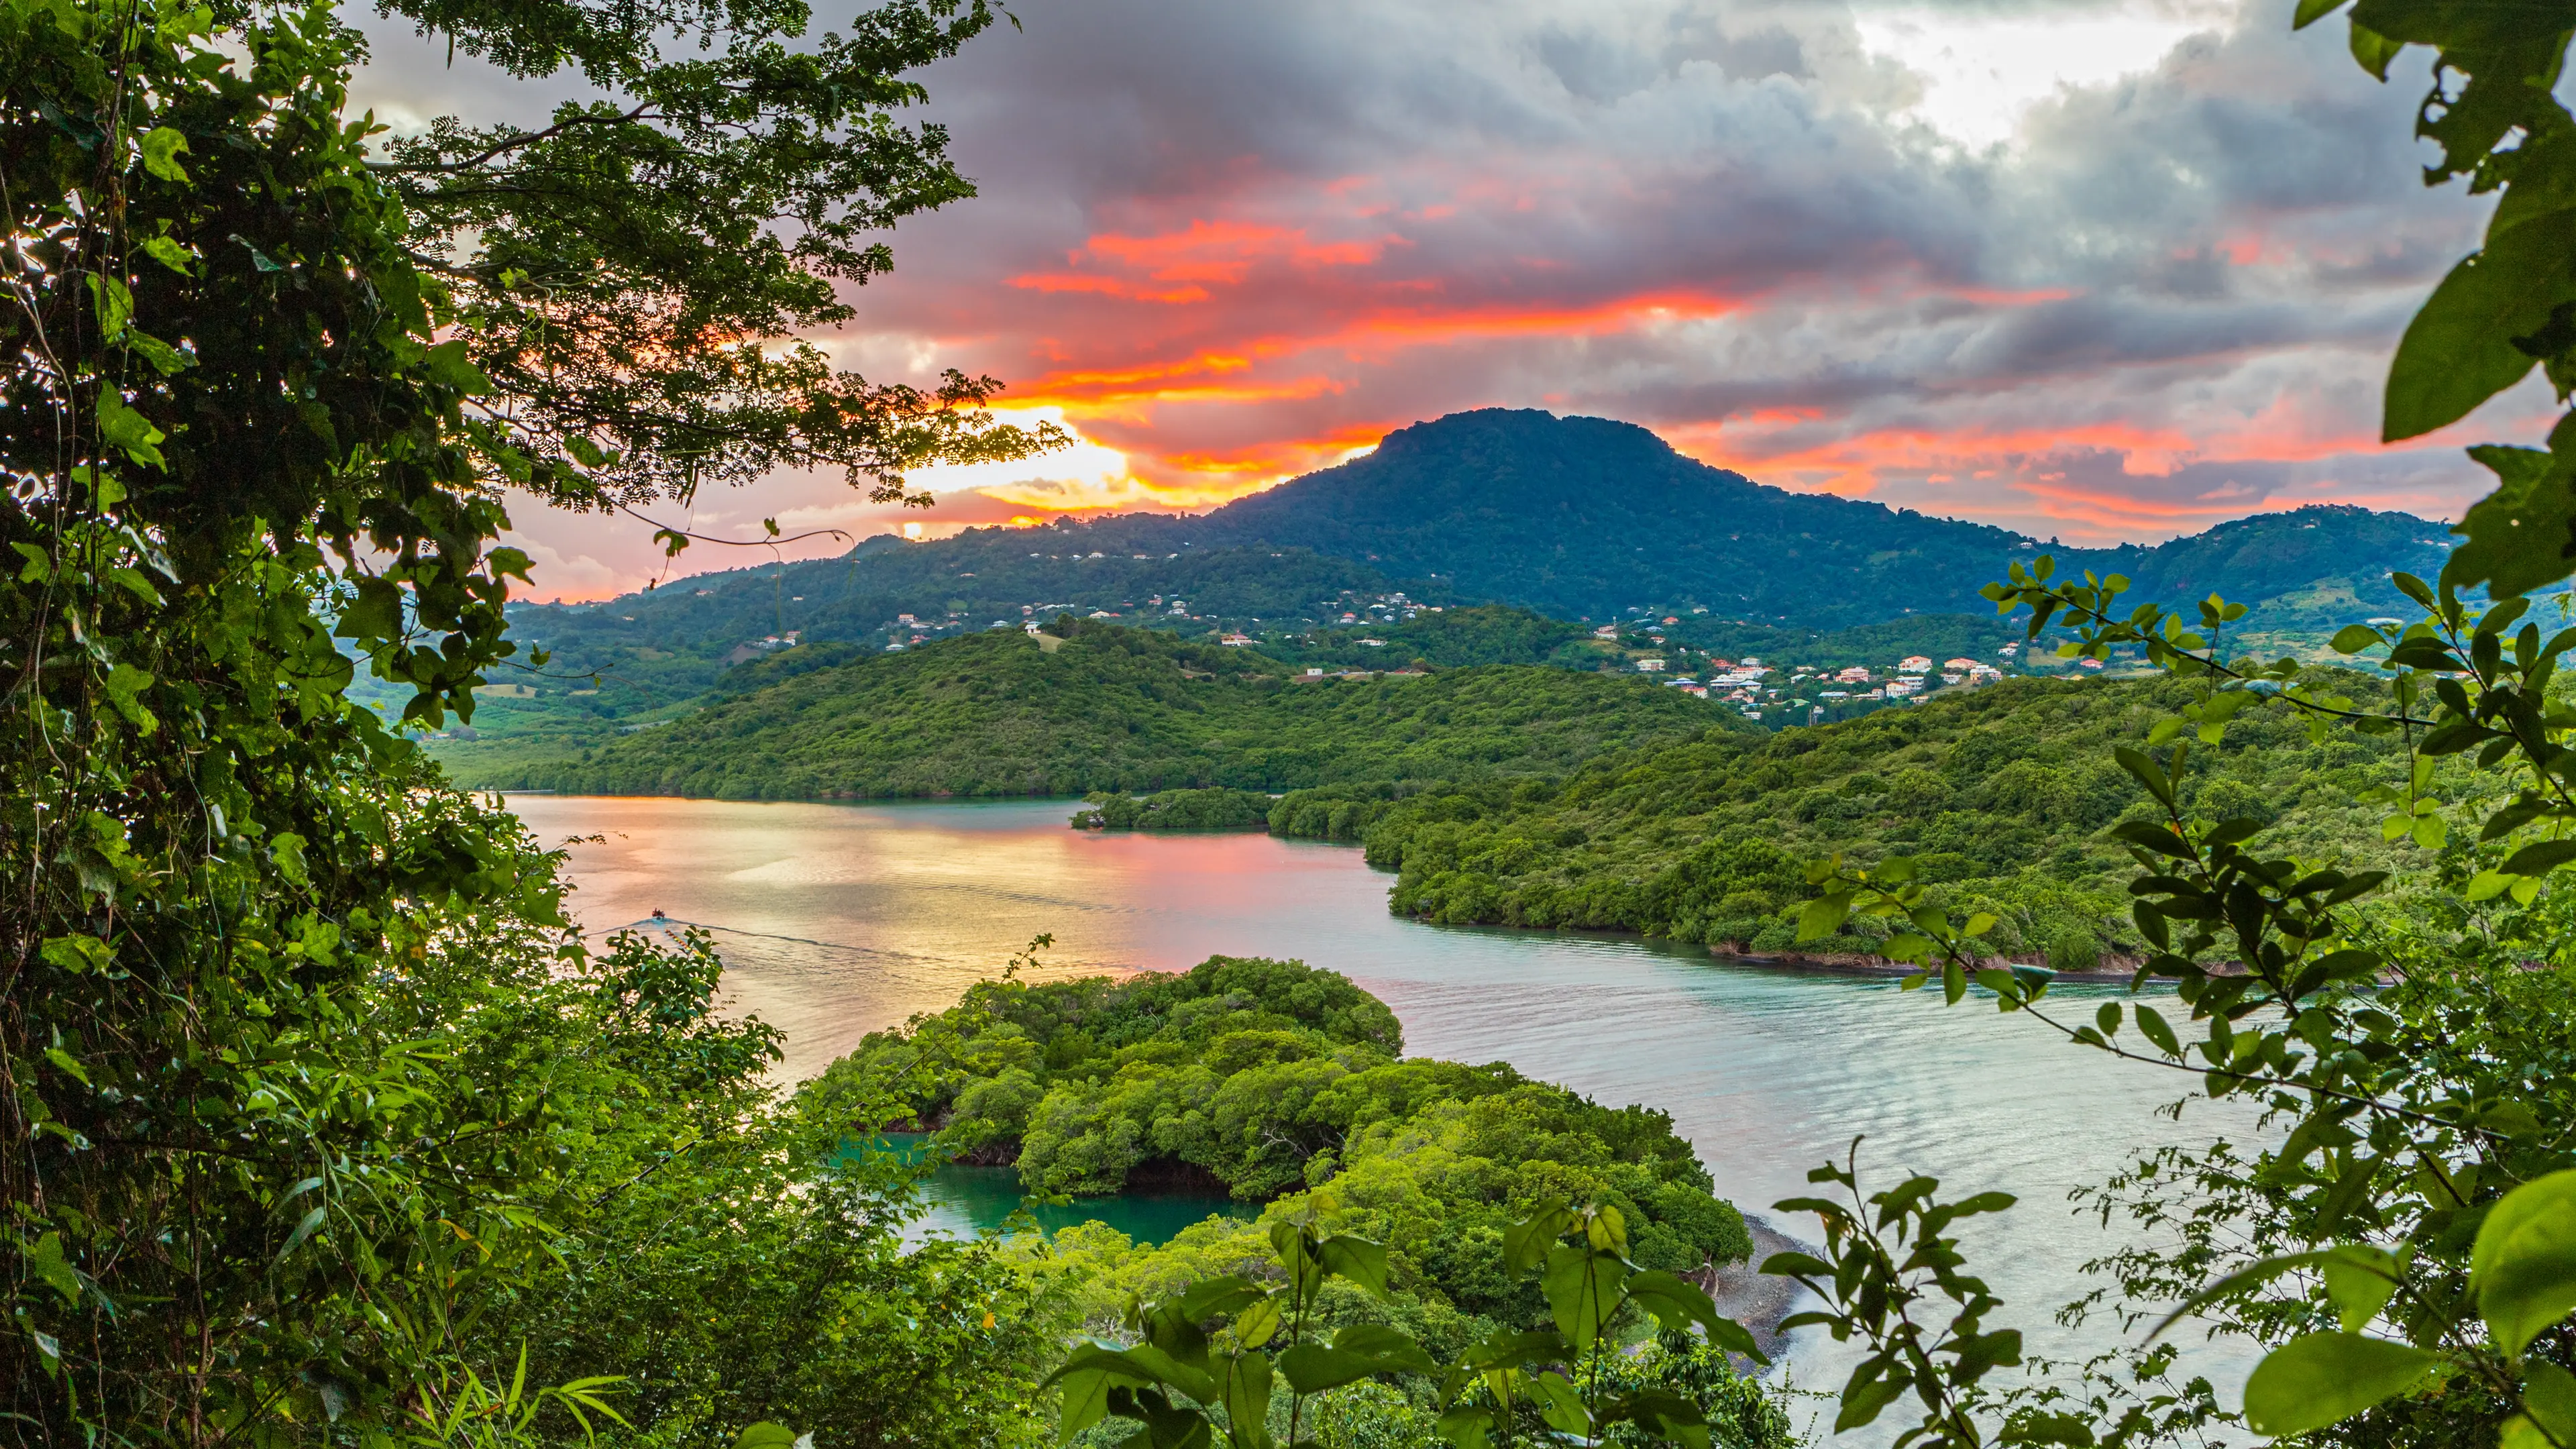 6-Day Ultimate Adventure Itinerary in Martinique, Caribbean